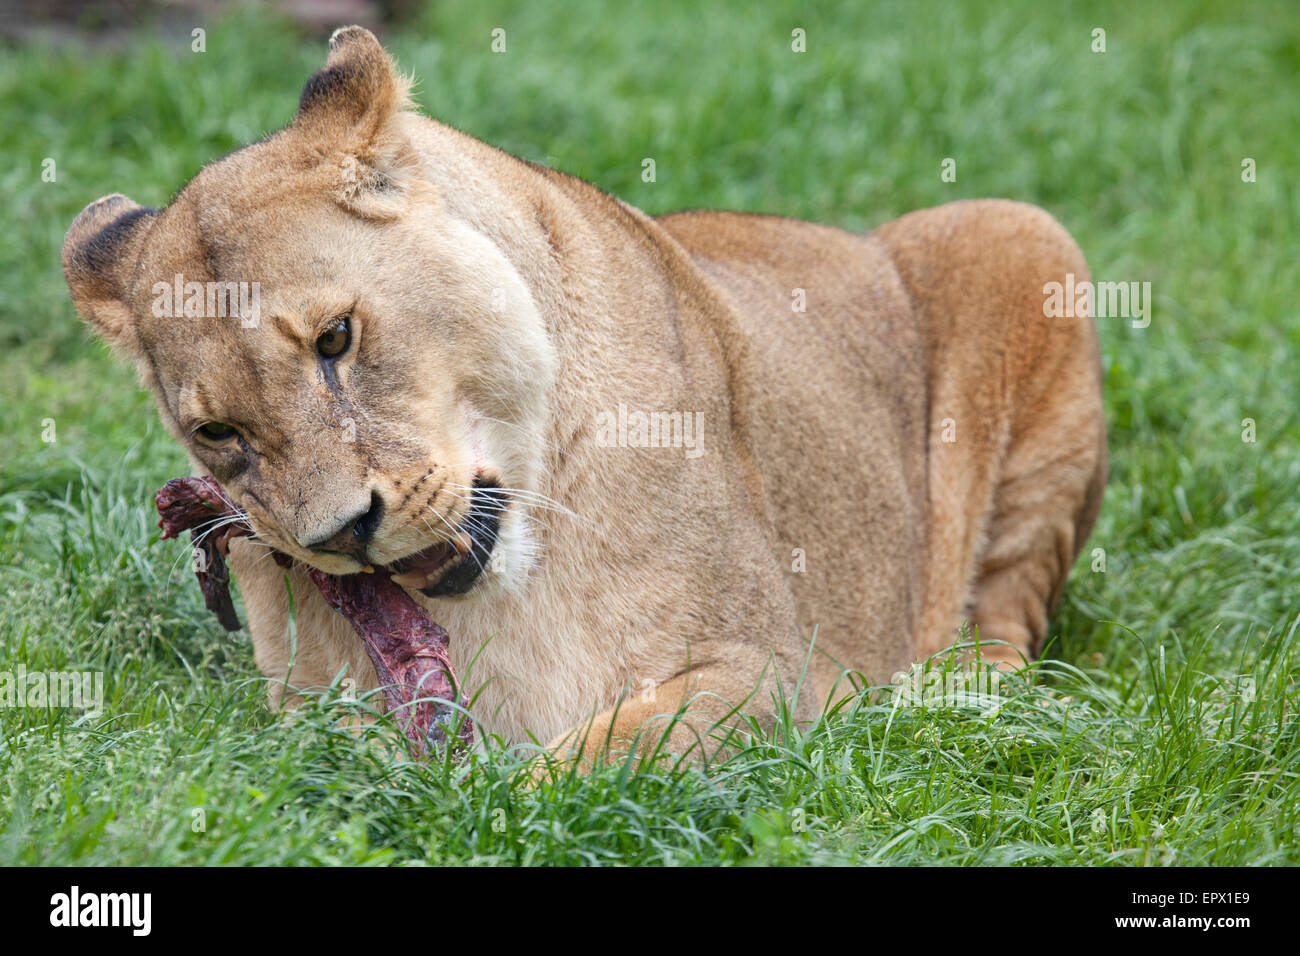 A landscape view of an African Lioness eating meal Stock Photo